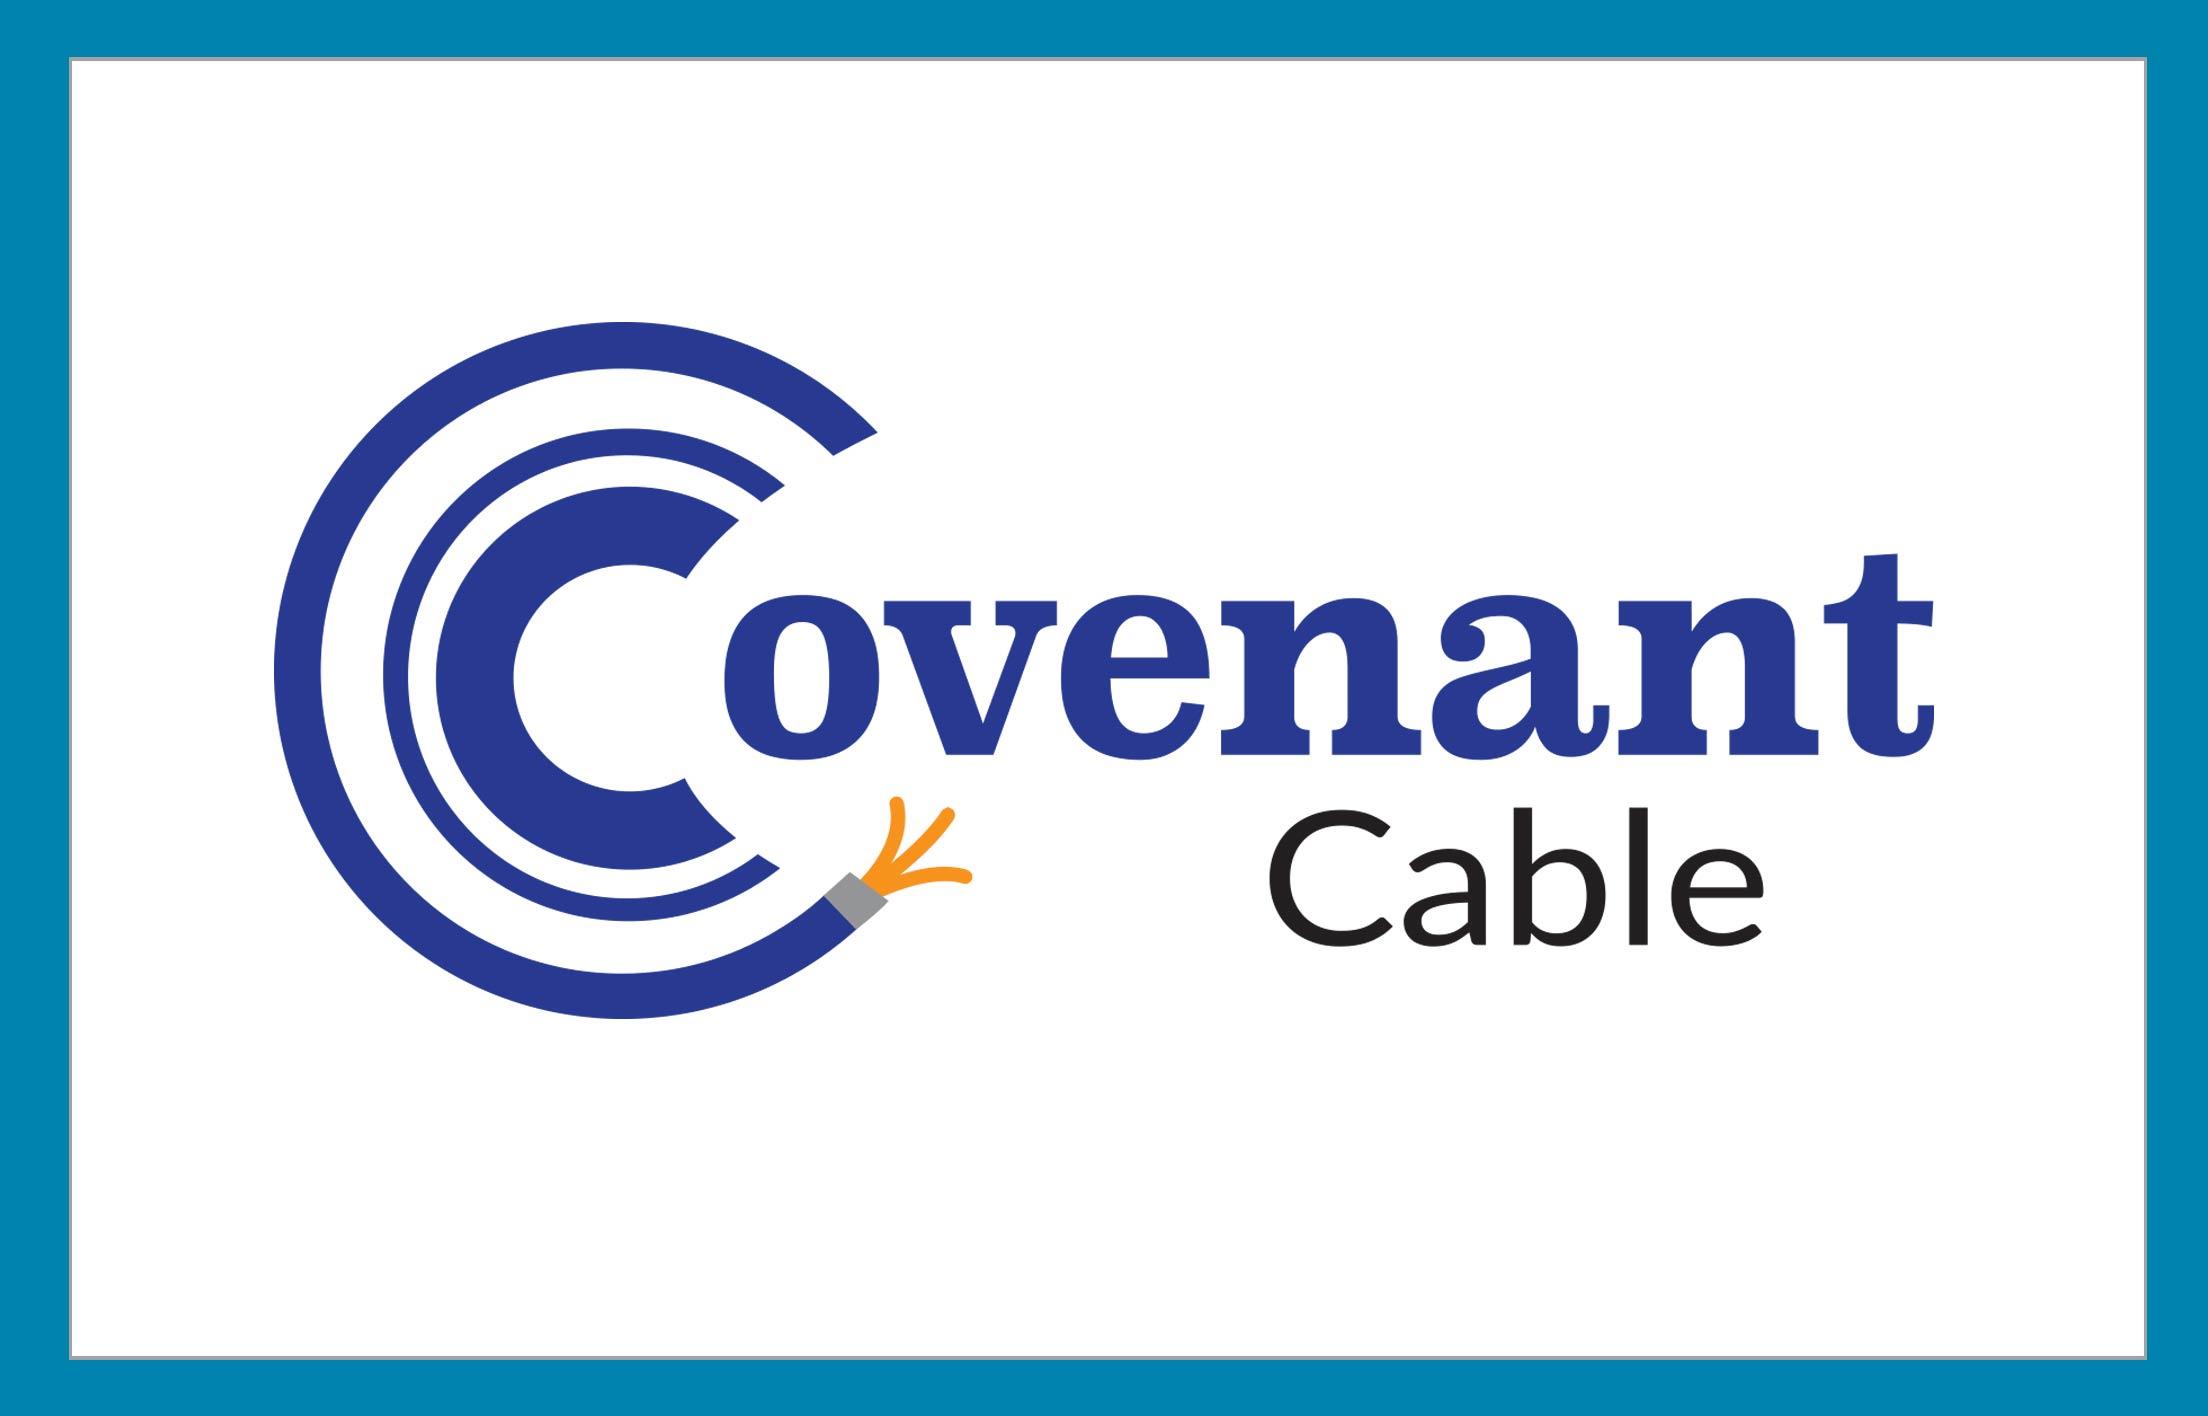 Cable Logo - Covenant Cable Logo | Right Eye Graphics